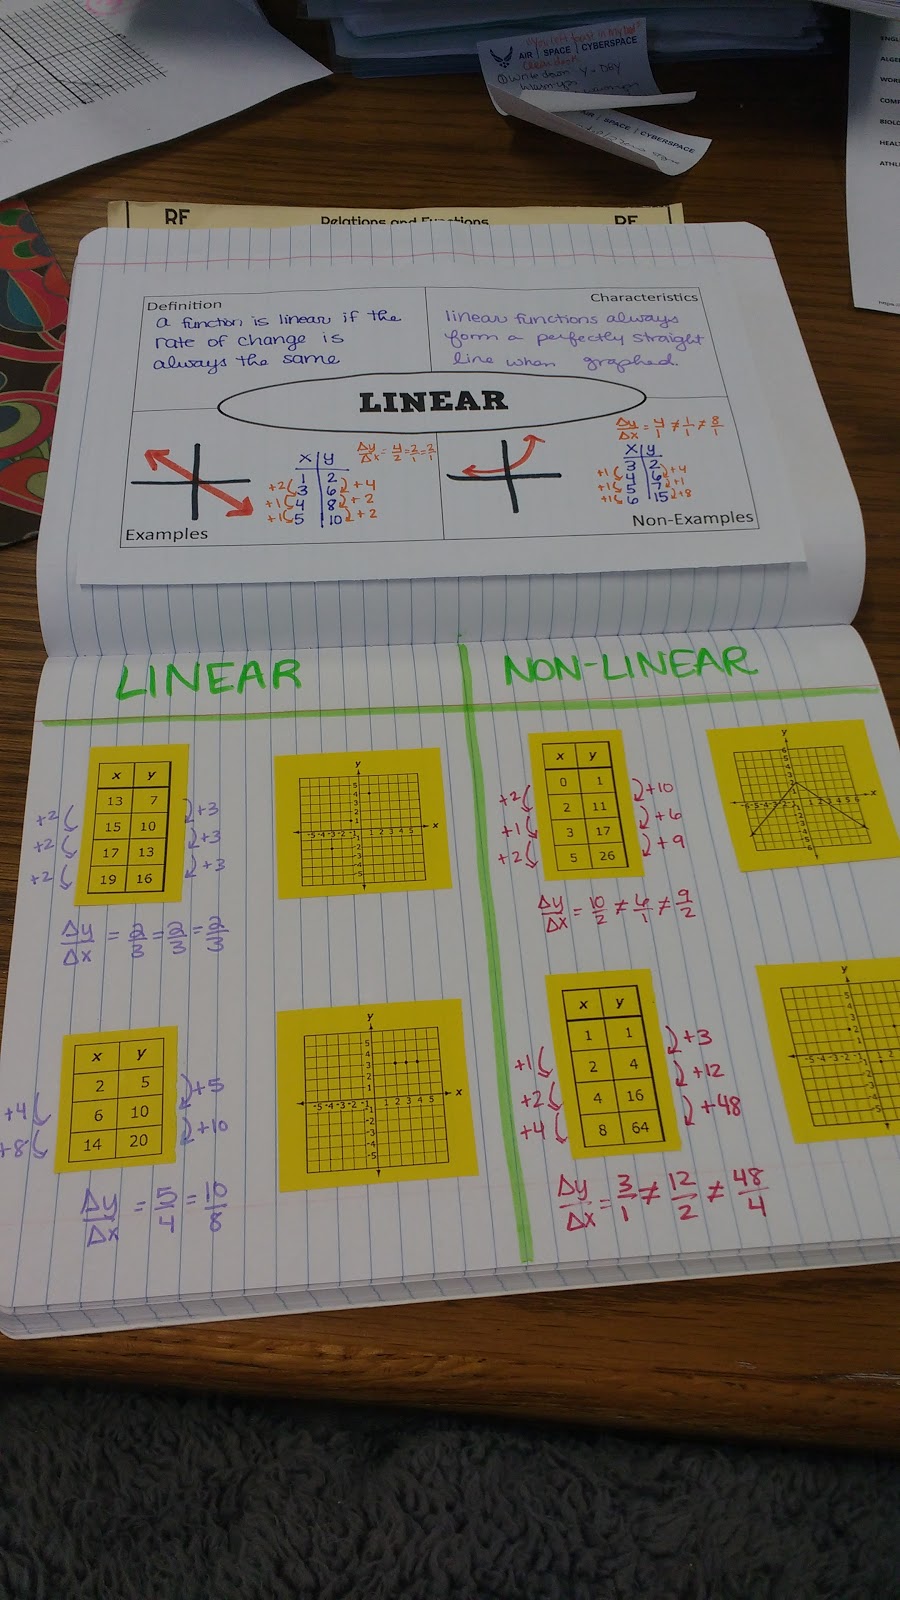 linear frayer model and linear vs non linear card sort activity 